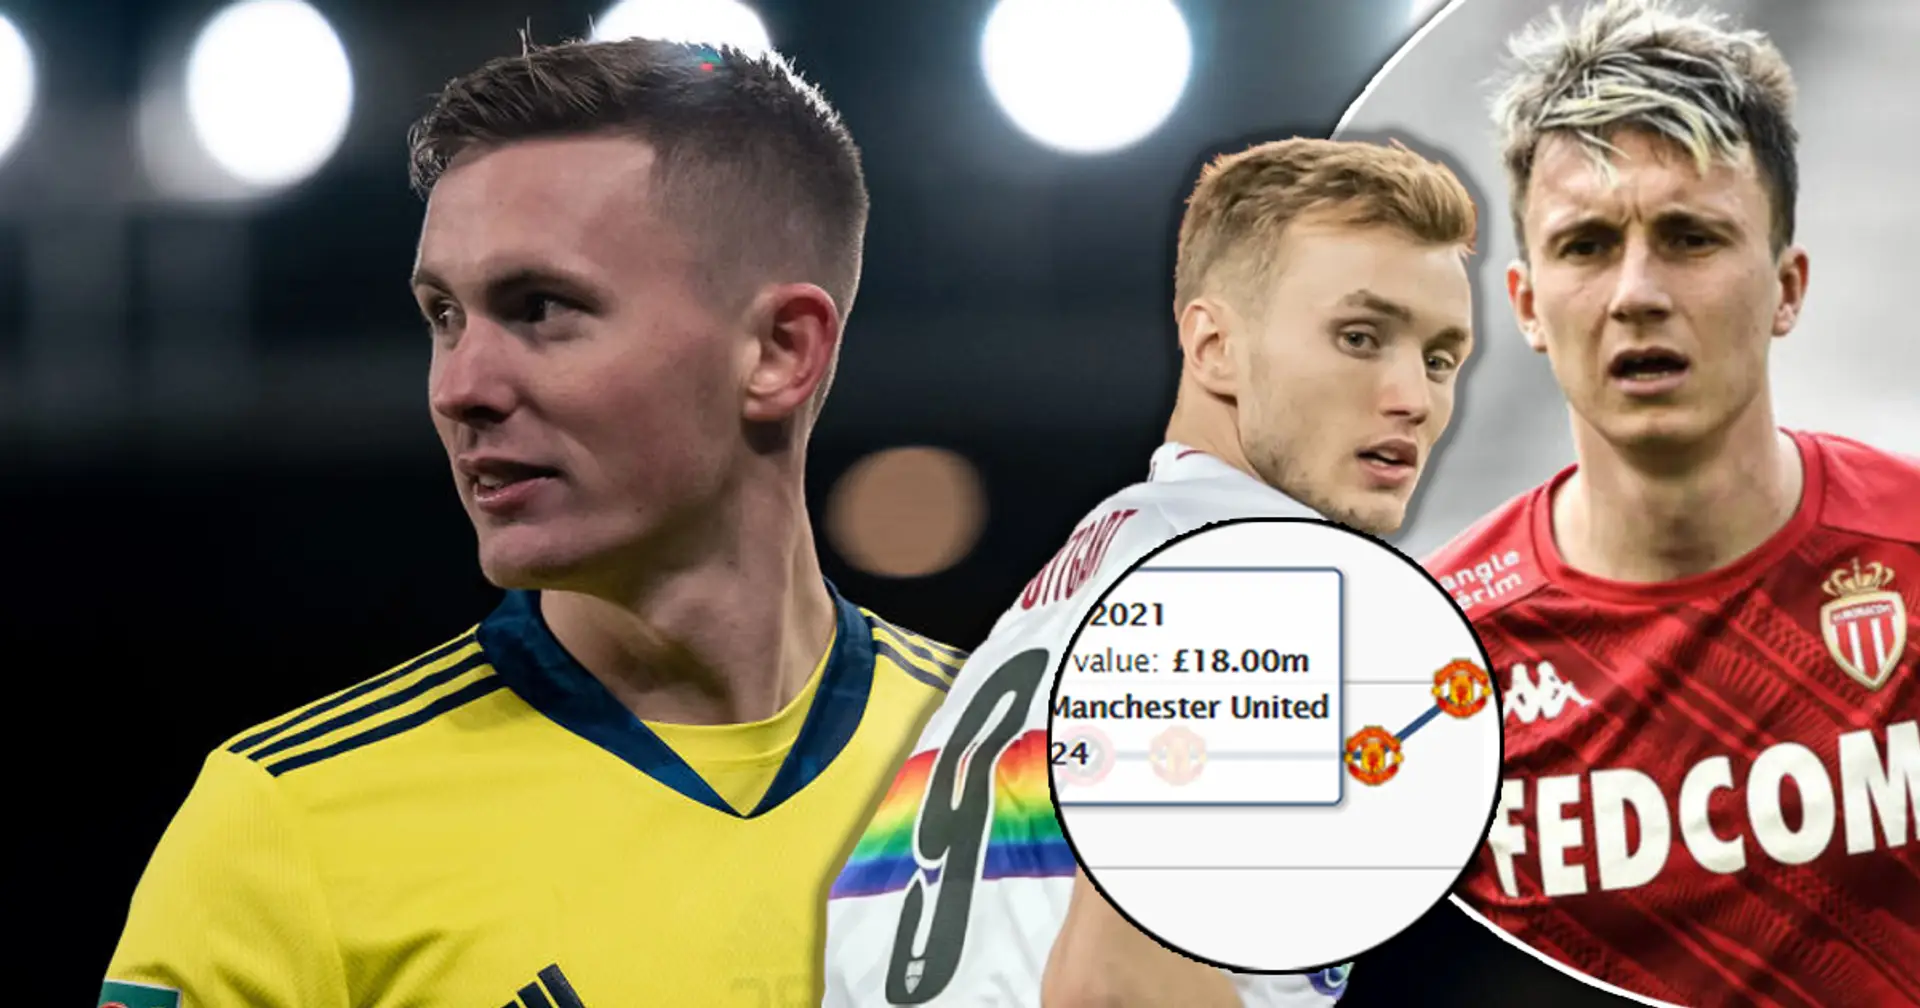 Henderson and 6 more players whose price could skyrocket after Euro 2020